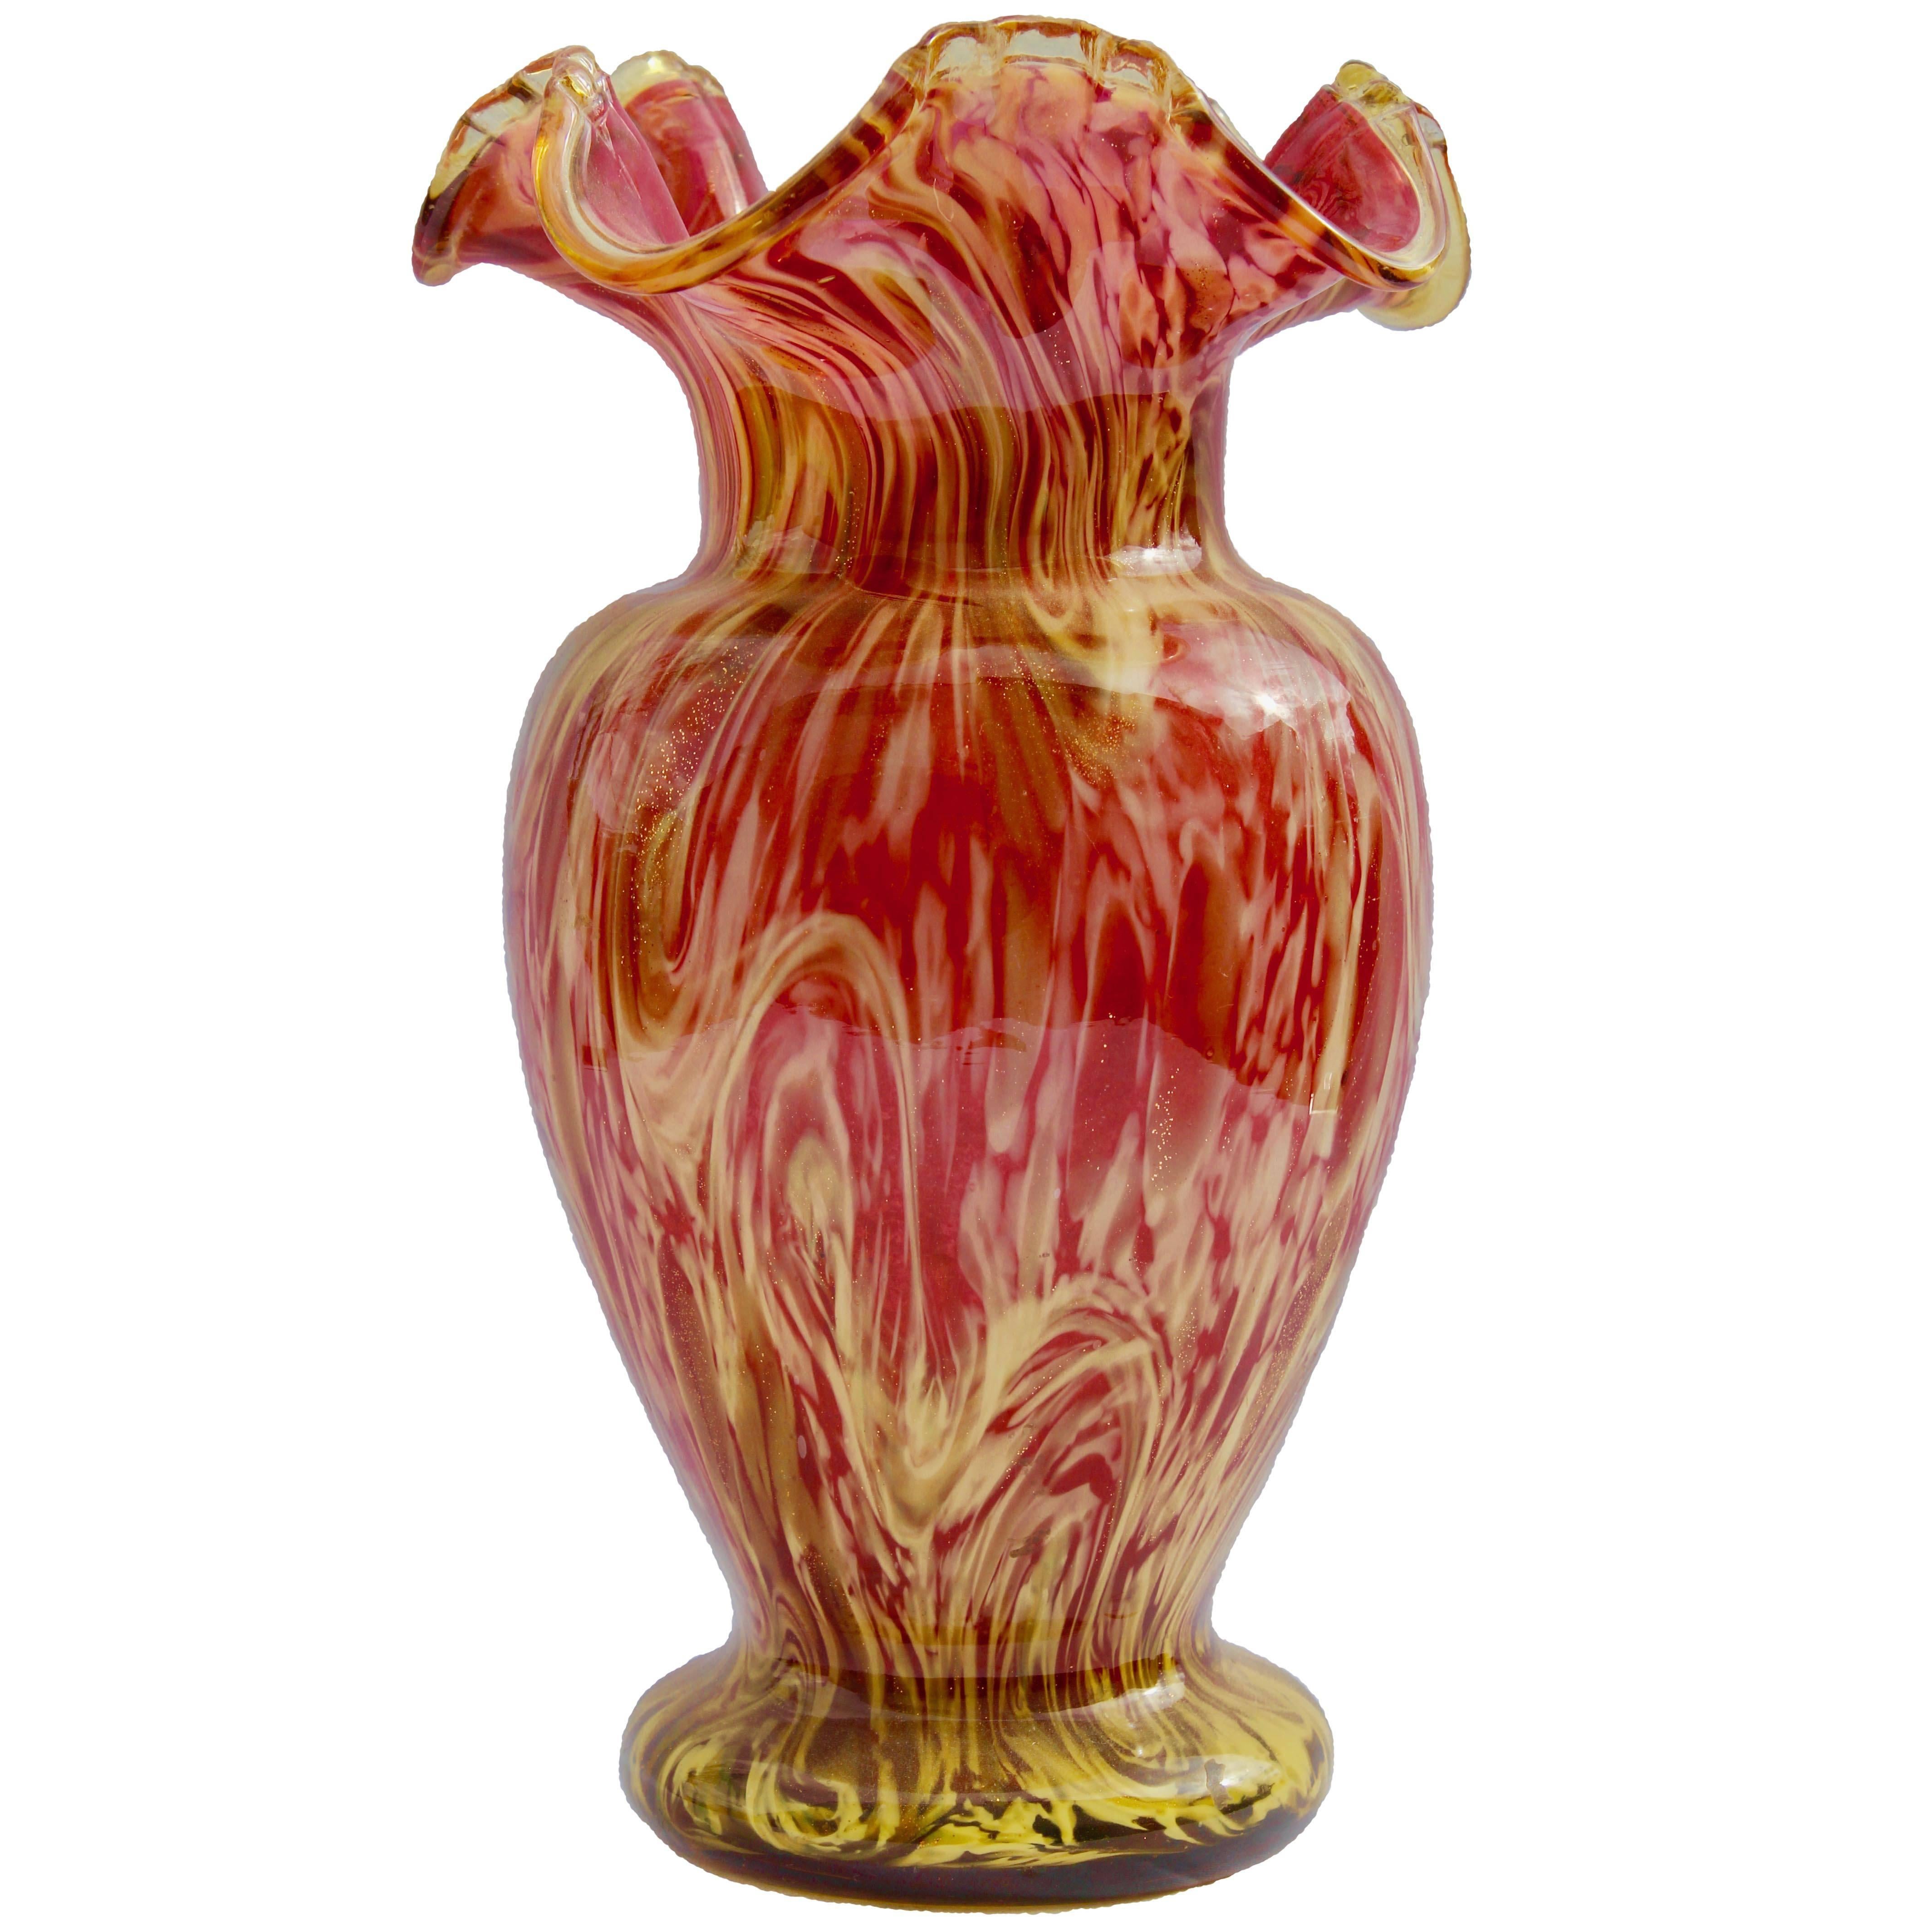  Murano Vase Yellow and Pink with Gold Inclusions